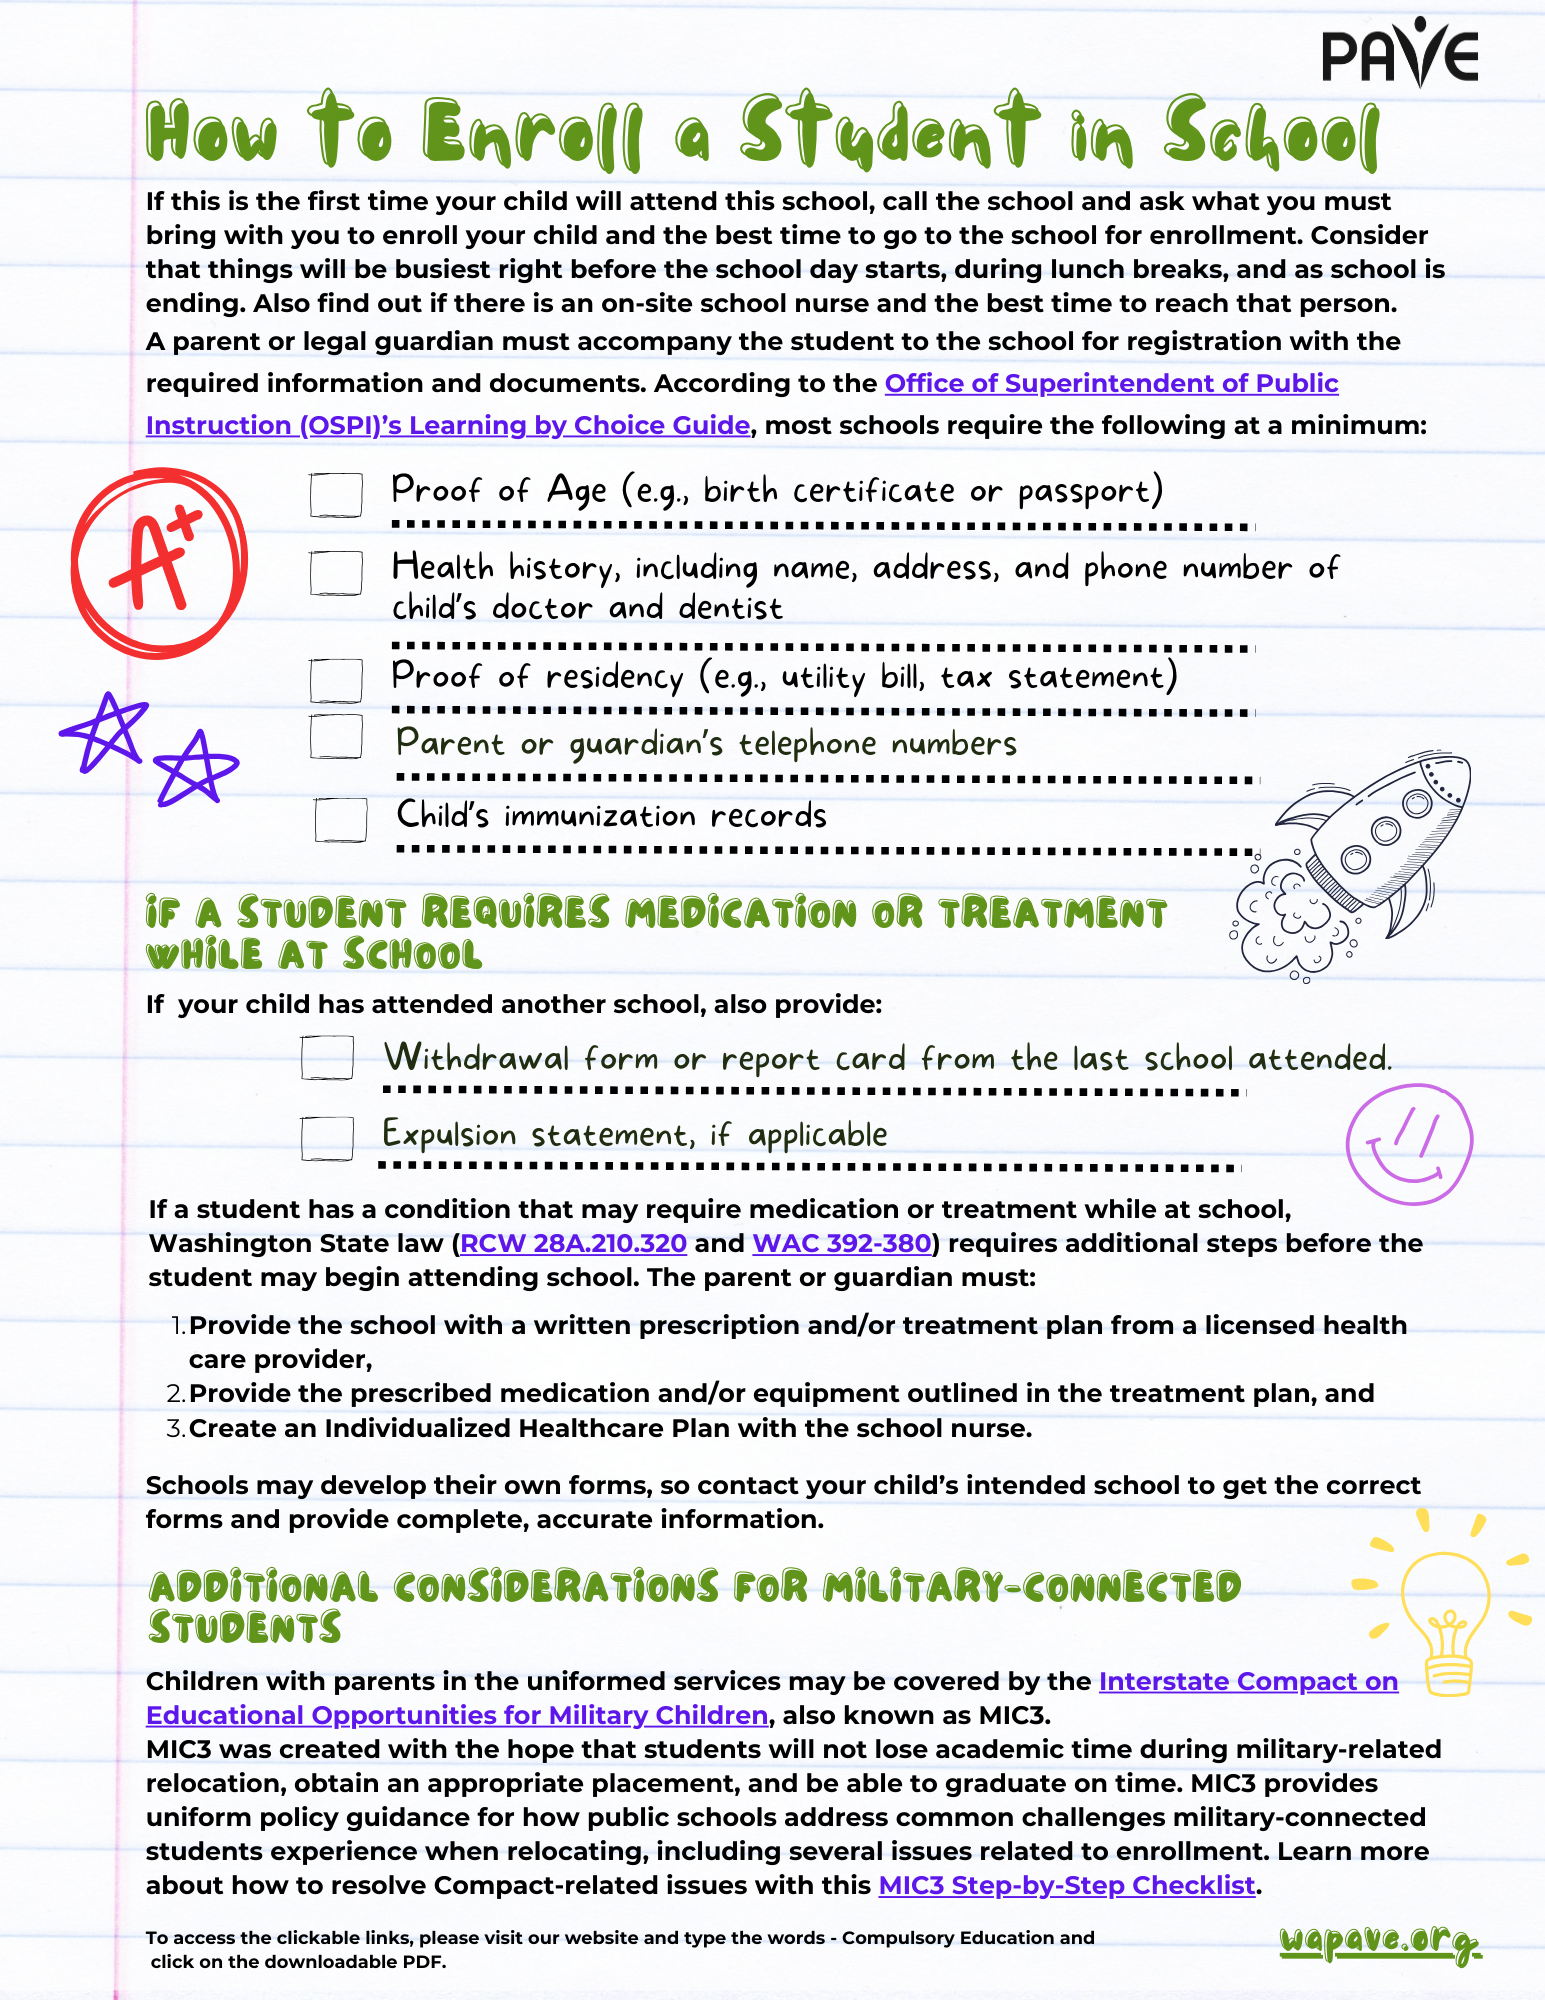 How to Enroll a Student in School Checklist To download the fillable form and get access to the clickable links, download the PDF